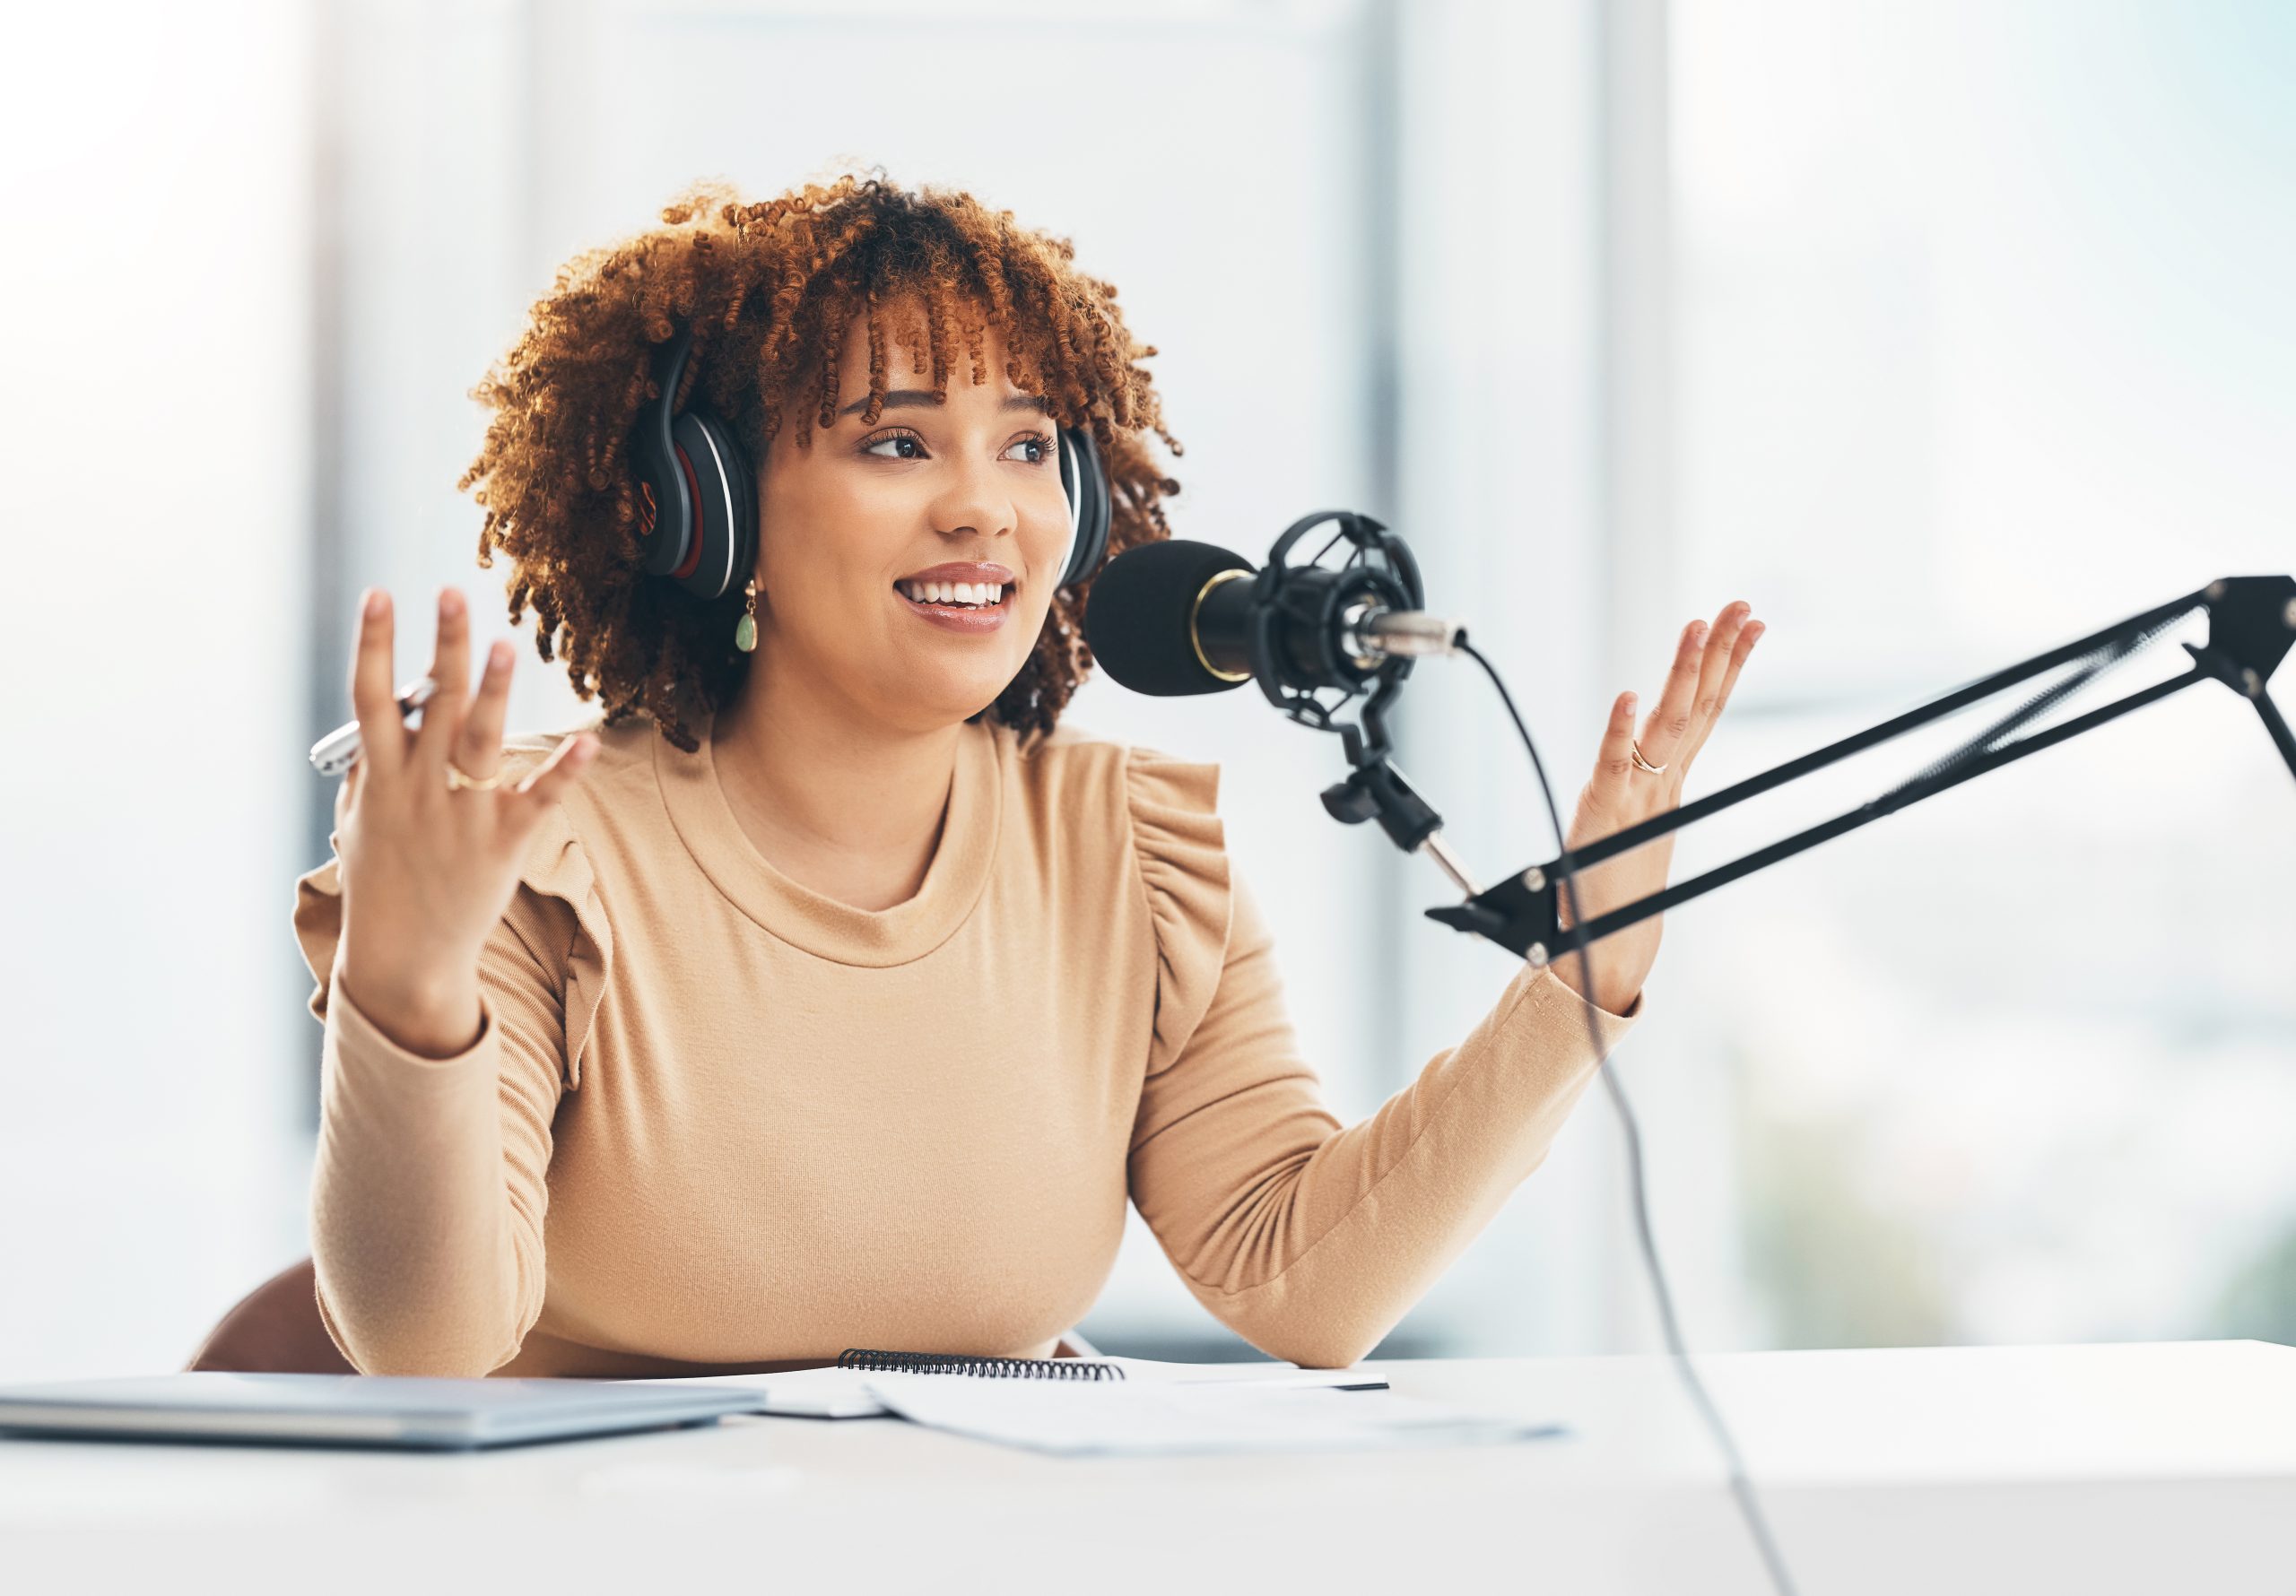 Radio show, podcast and black woman with microphone, talking and live streaming for advice. African American female presenter, lady or influencer with headphones, discussion or broadcast in workplace.